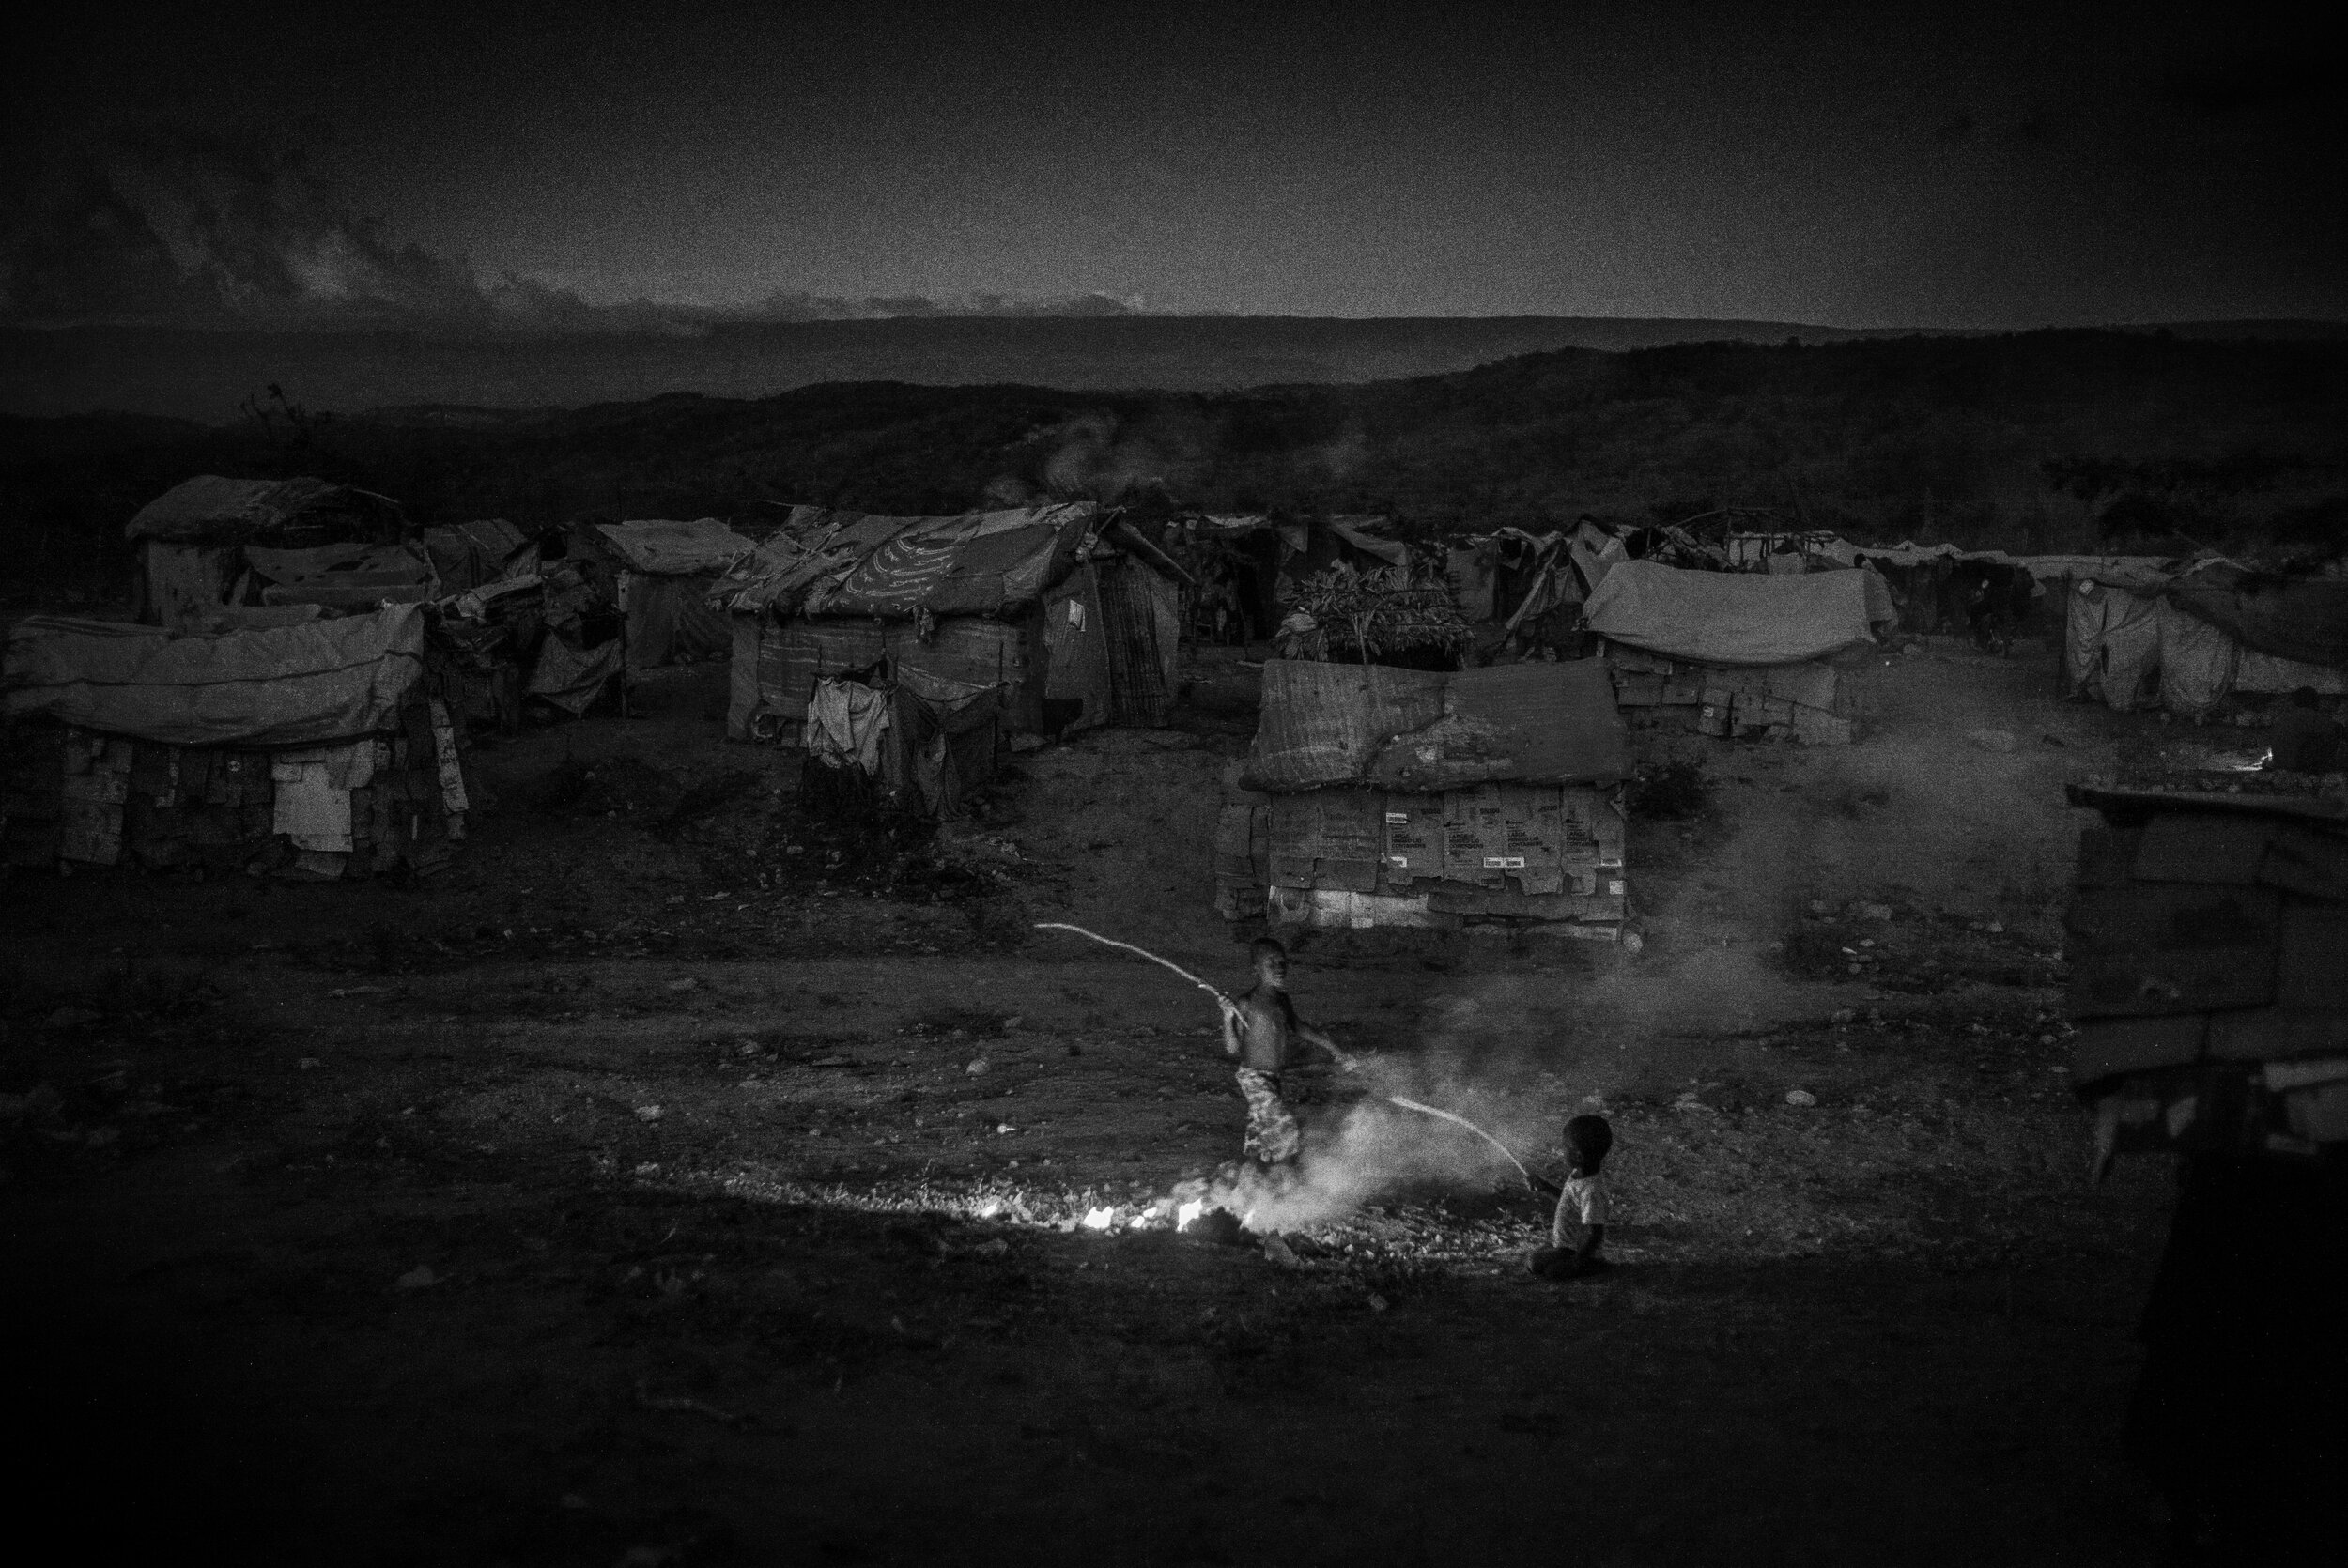  Photo of boy standing by a fire at night, lit by the flames 